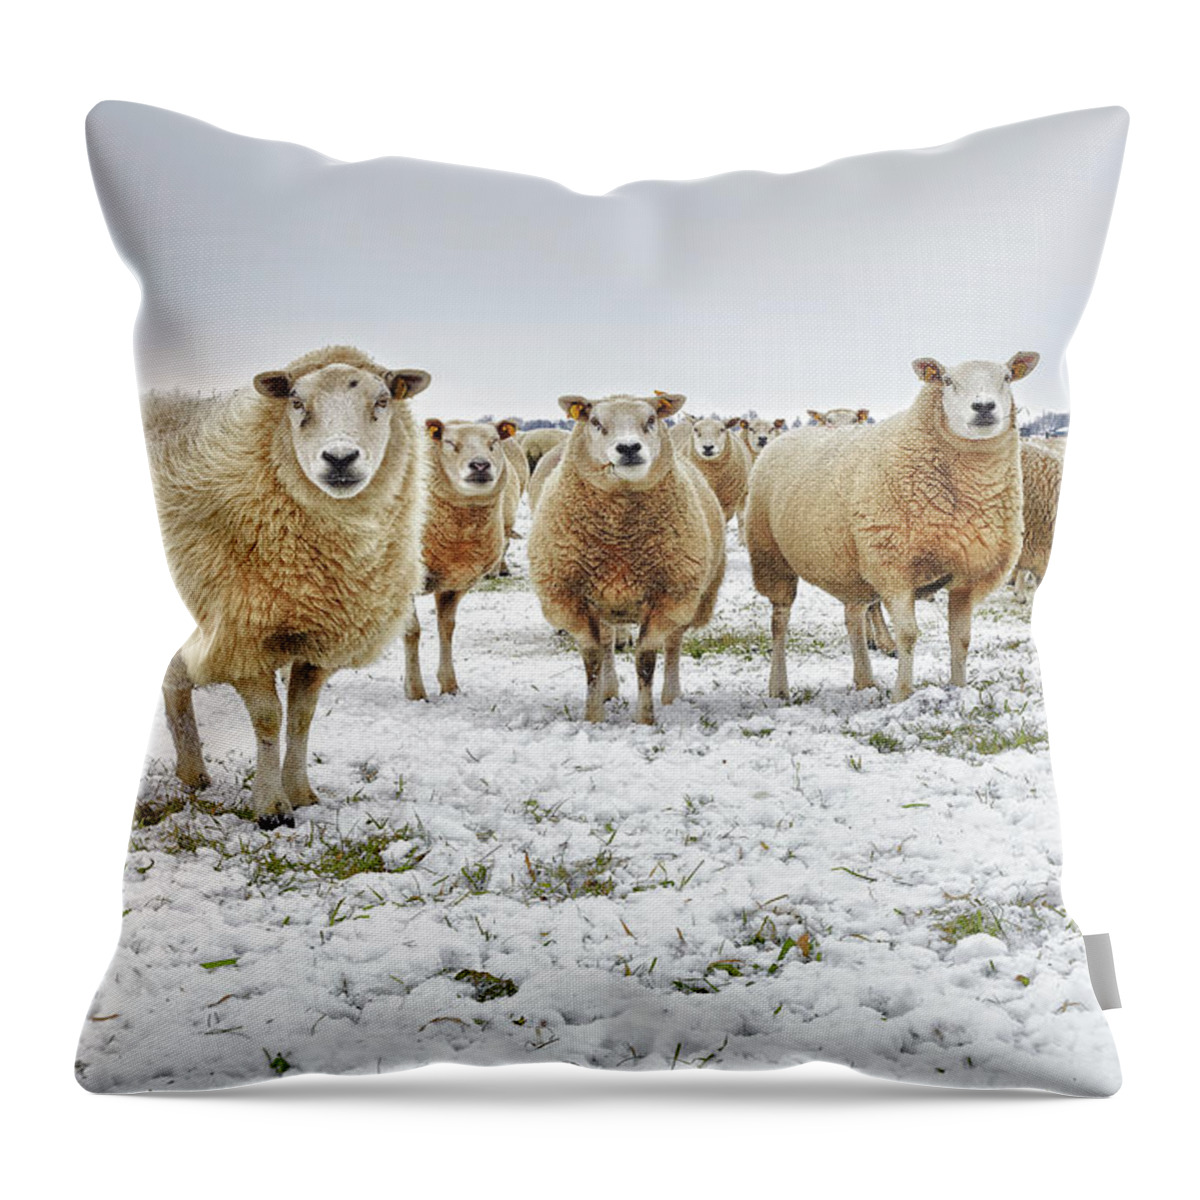 Snow Throw Pillow featuring the photograph Sheep In A Winter Landscape by Marijke Mooy Photography